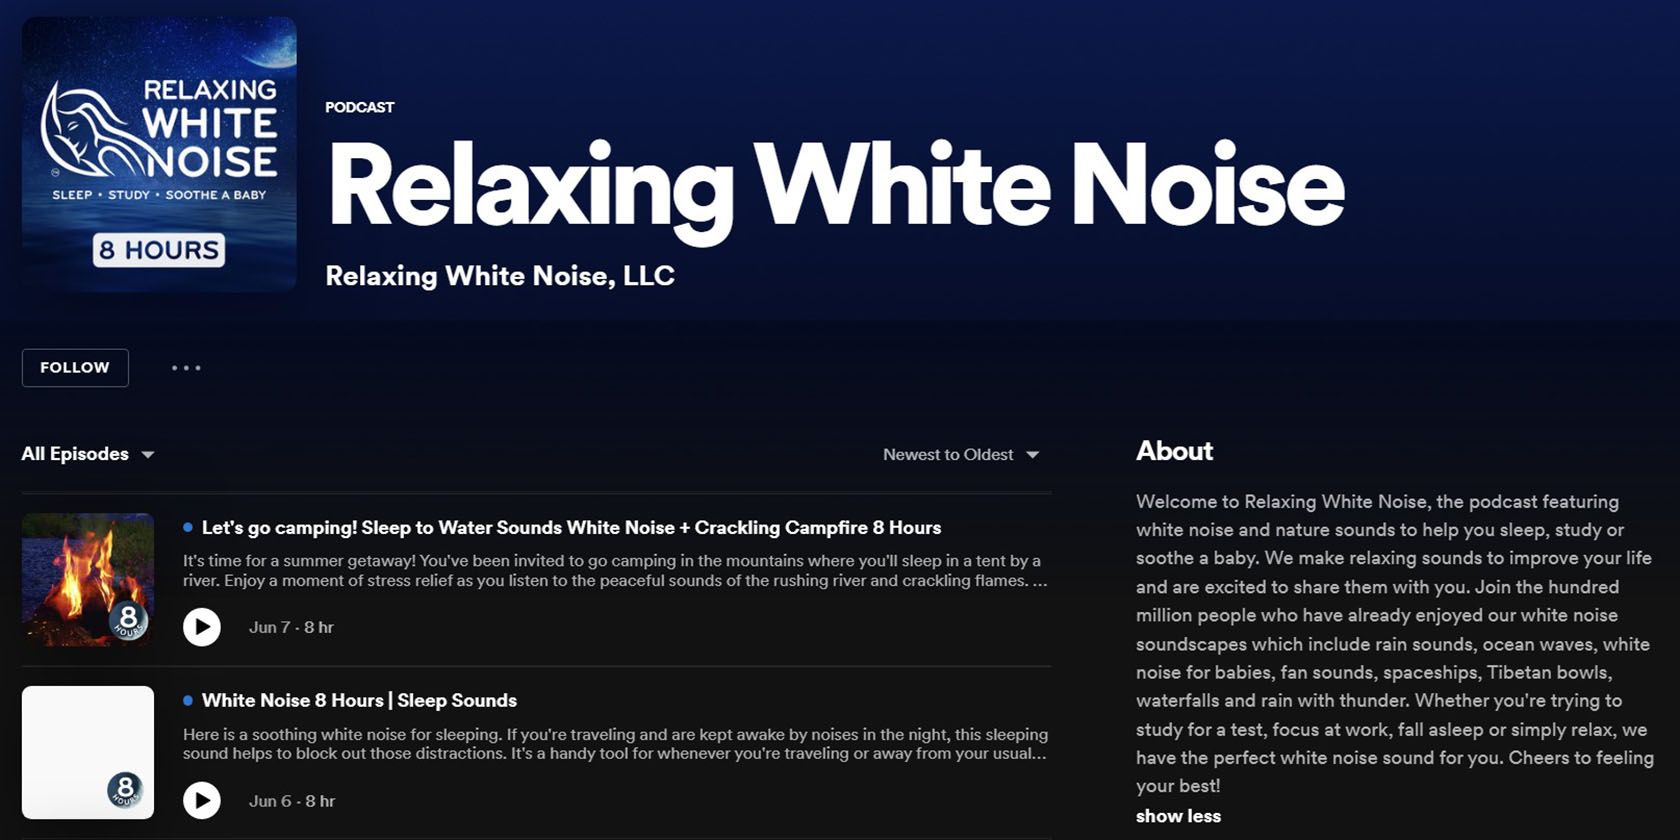 Relaxing White Noise Podcast